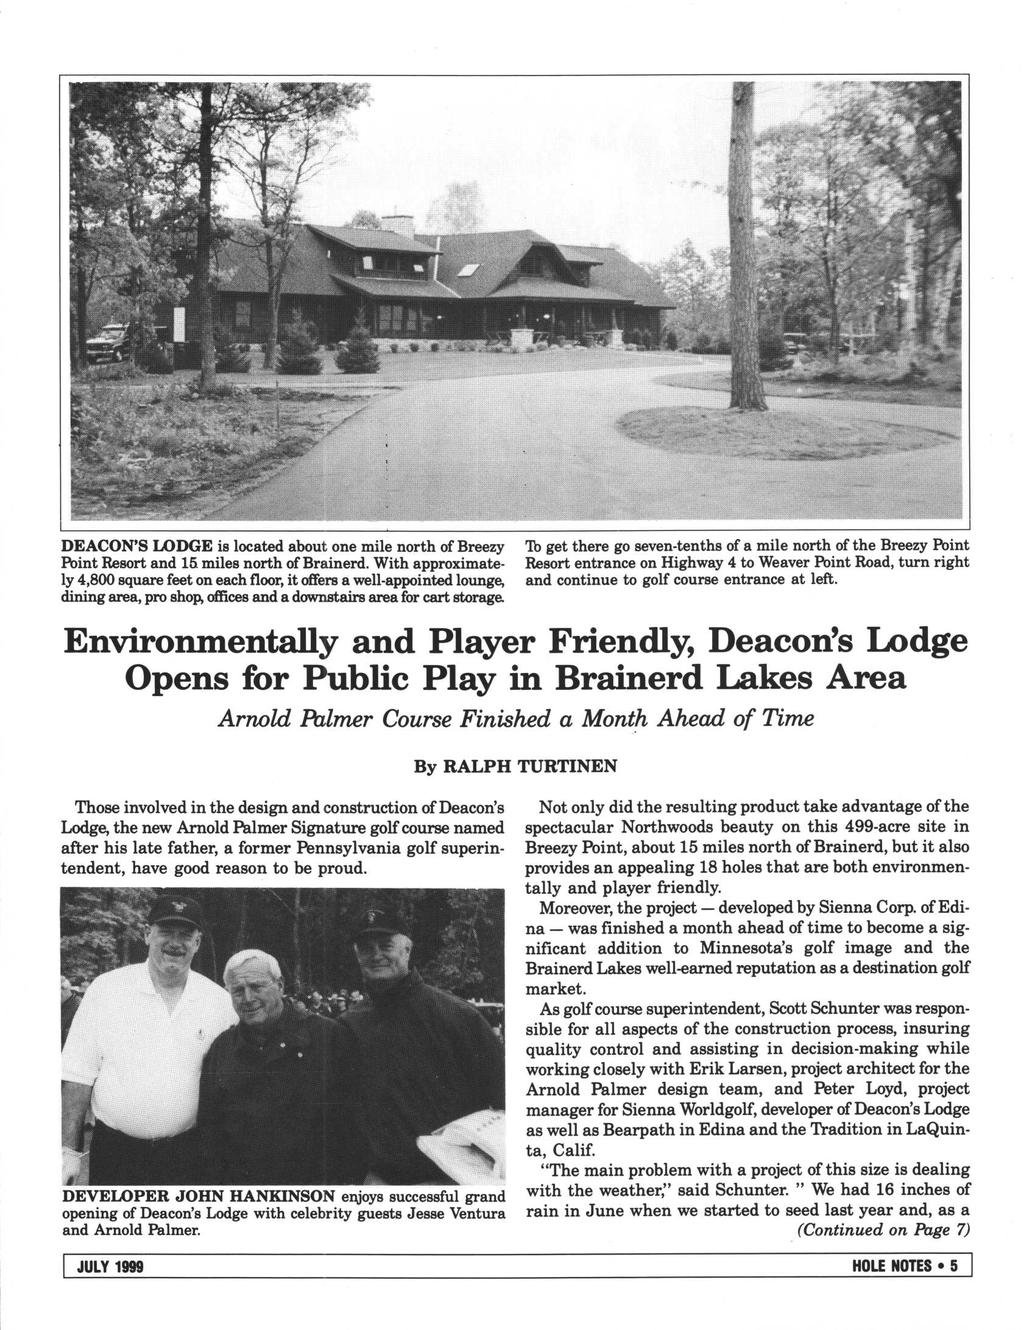 DEACON'S LODGE is located about one mile north of Breezy lb get there go seven-tenths of a mile north of the Breezy Point Point Resort and 15 miles north of Brainerd.